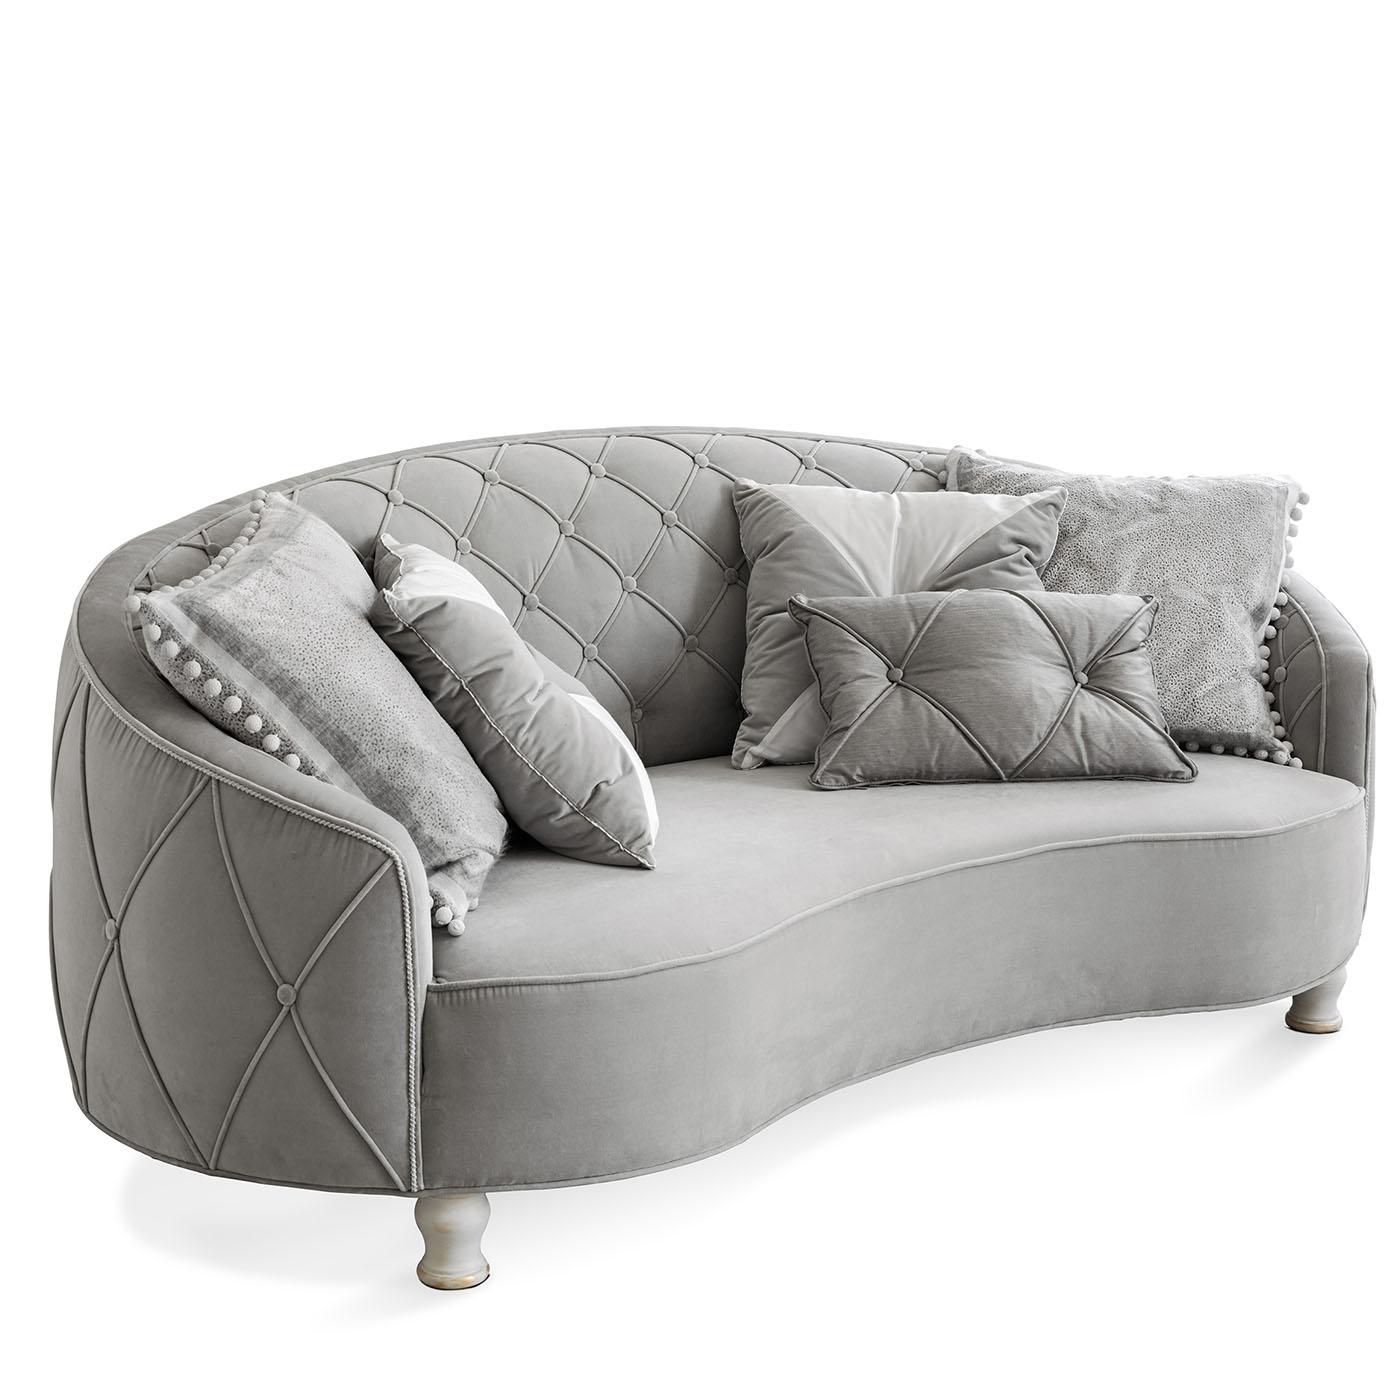 Two-seater sofa with quilted bottom capitonnè, upholstered with cotton velvet, wooden feet in white finishing. Pillows included as per the photo.